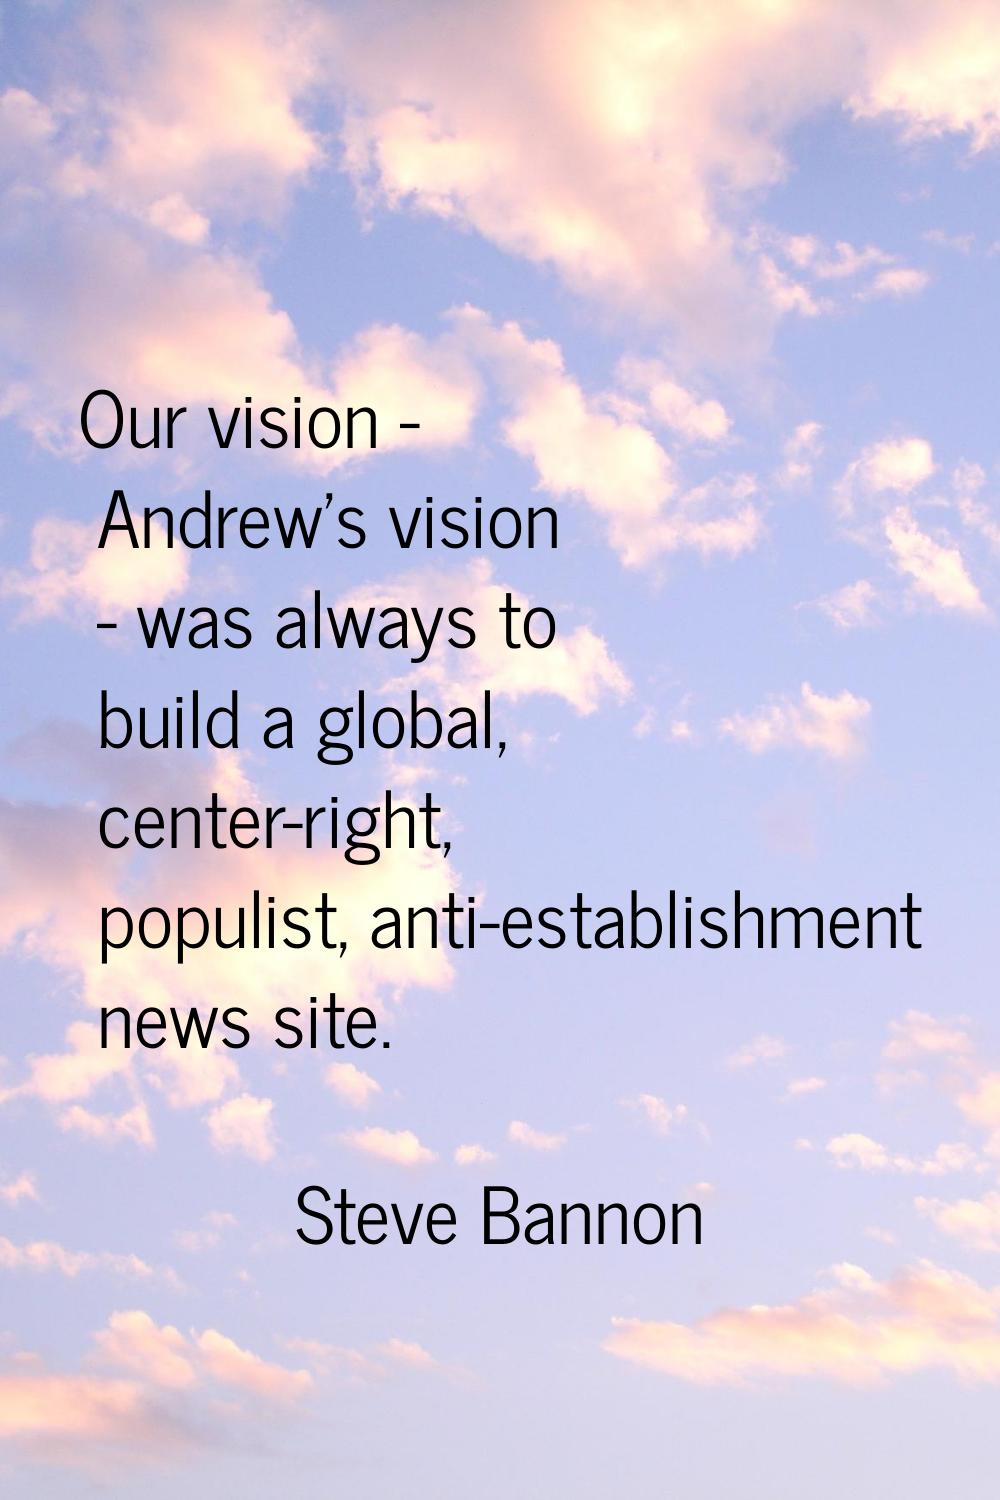 Our vision - Andrew's vision - was always to build a global, center-right, populist, anti-establish